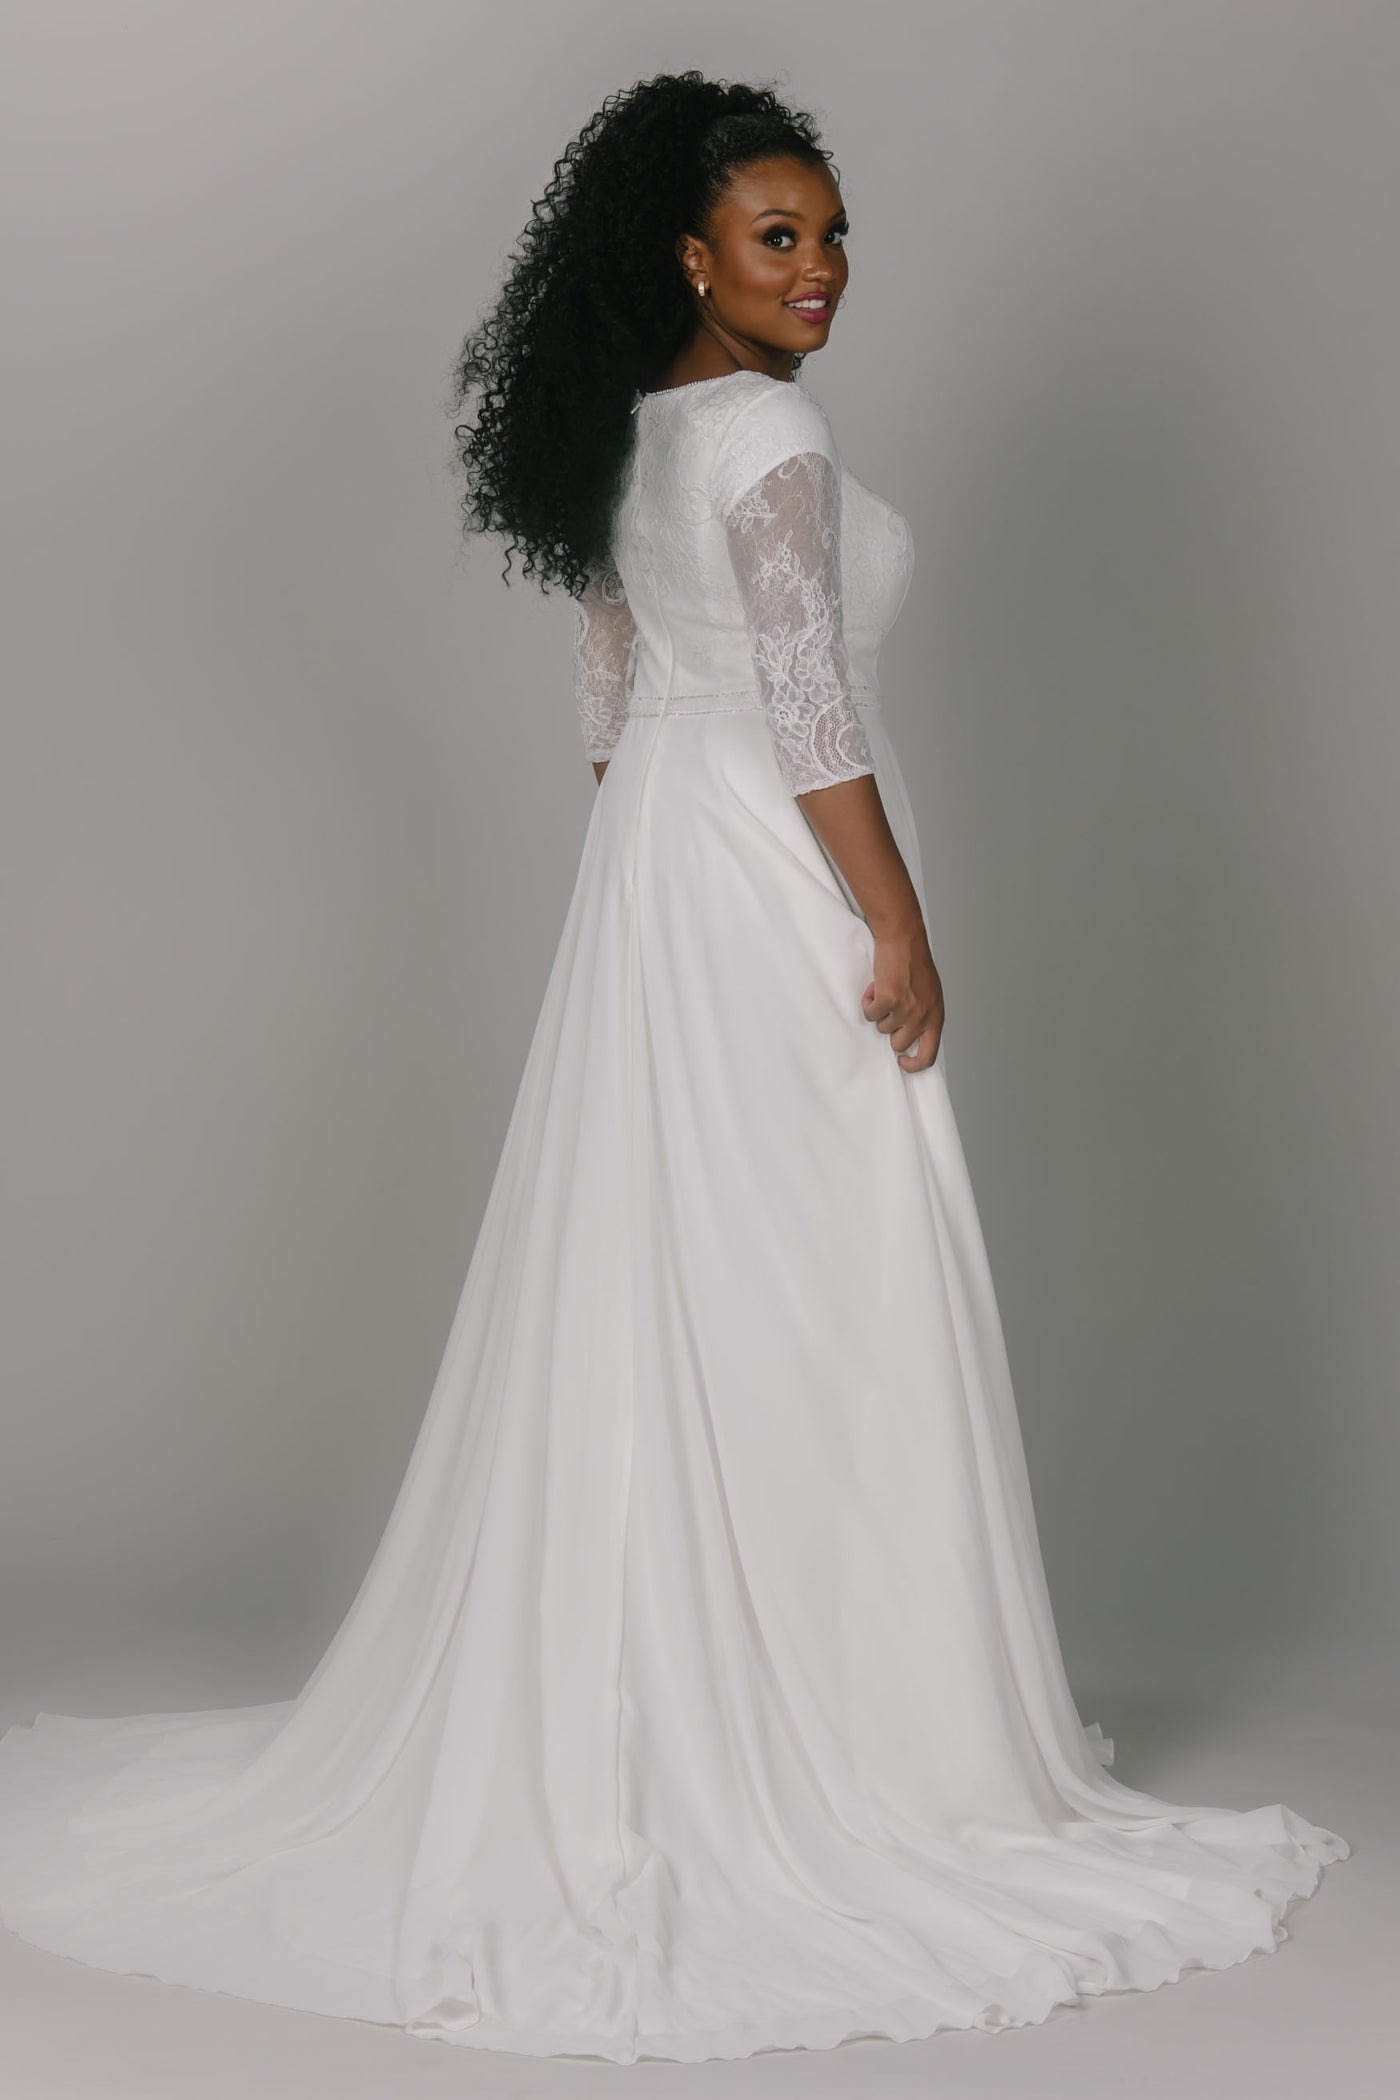 Modest wedding dress featuring a lace top and chiffon bottom. It has a high scoop neckline and three quarter length sleeves. It has a sparkly belt and a flowy skirt. This modest wedding dress is an icon for this particular style.